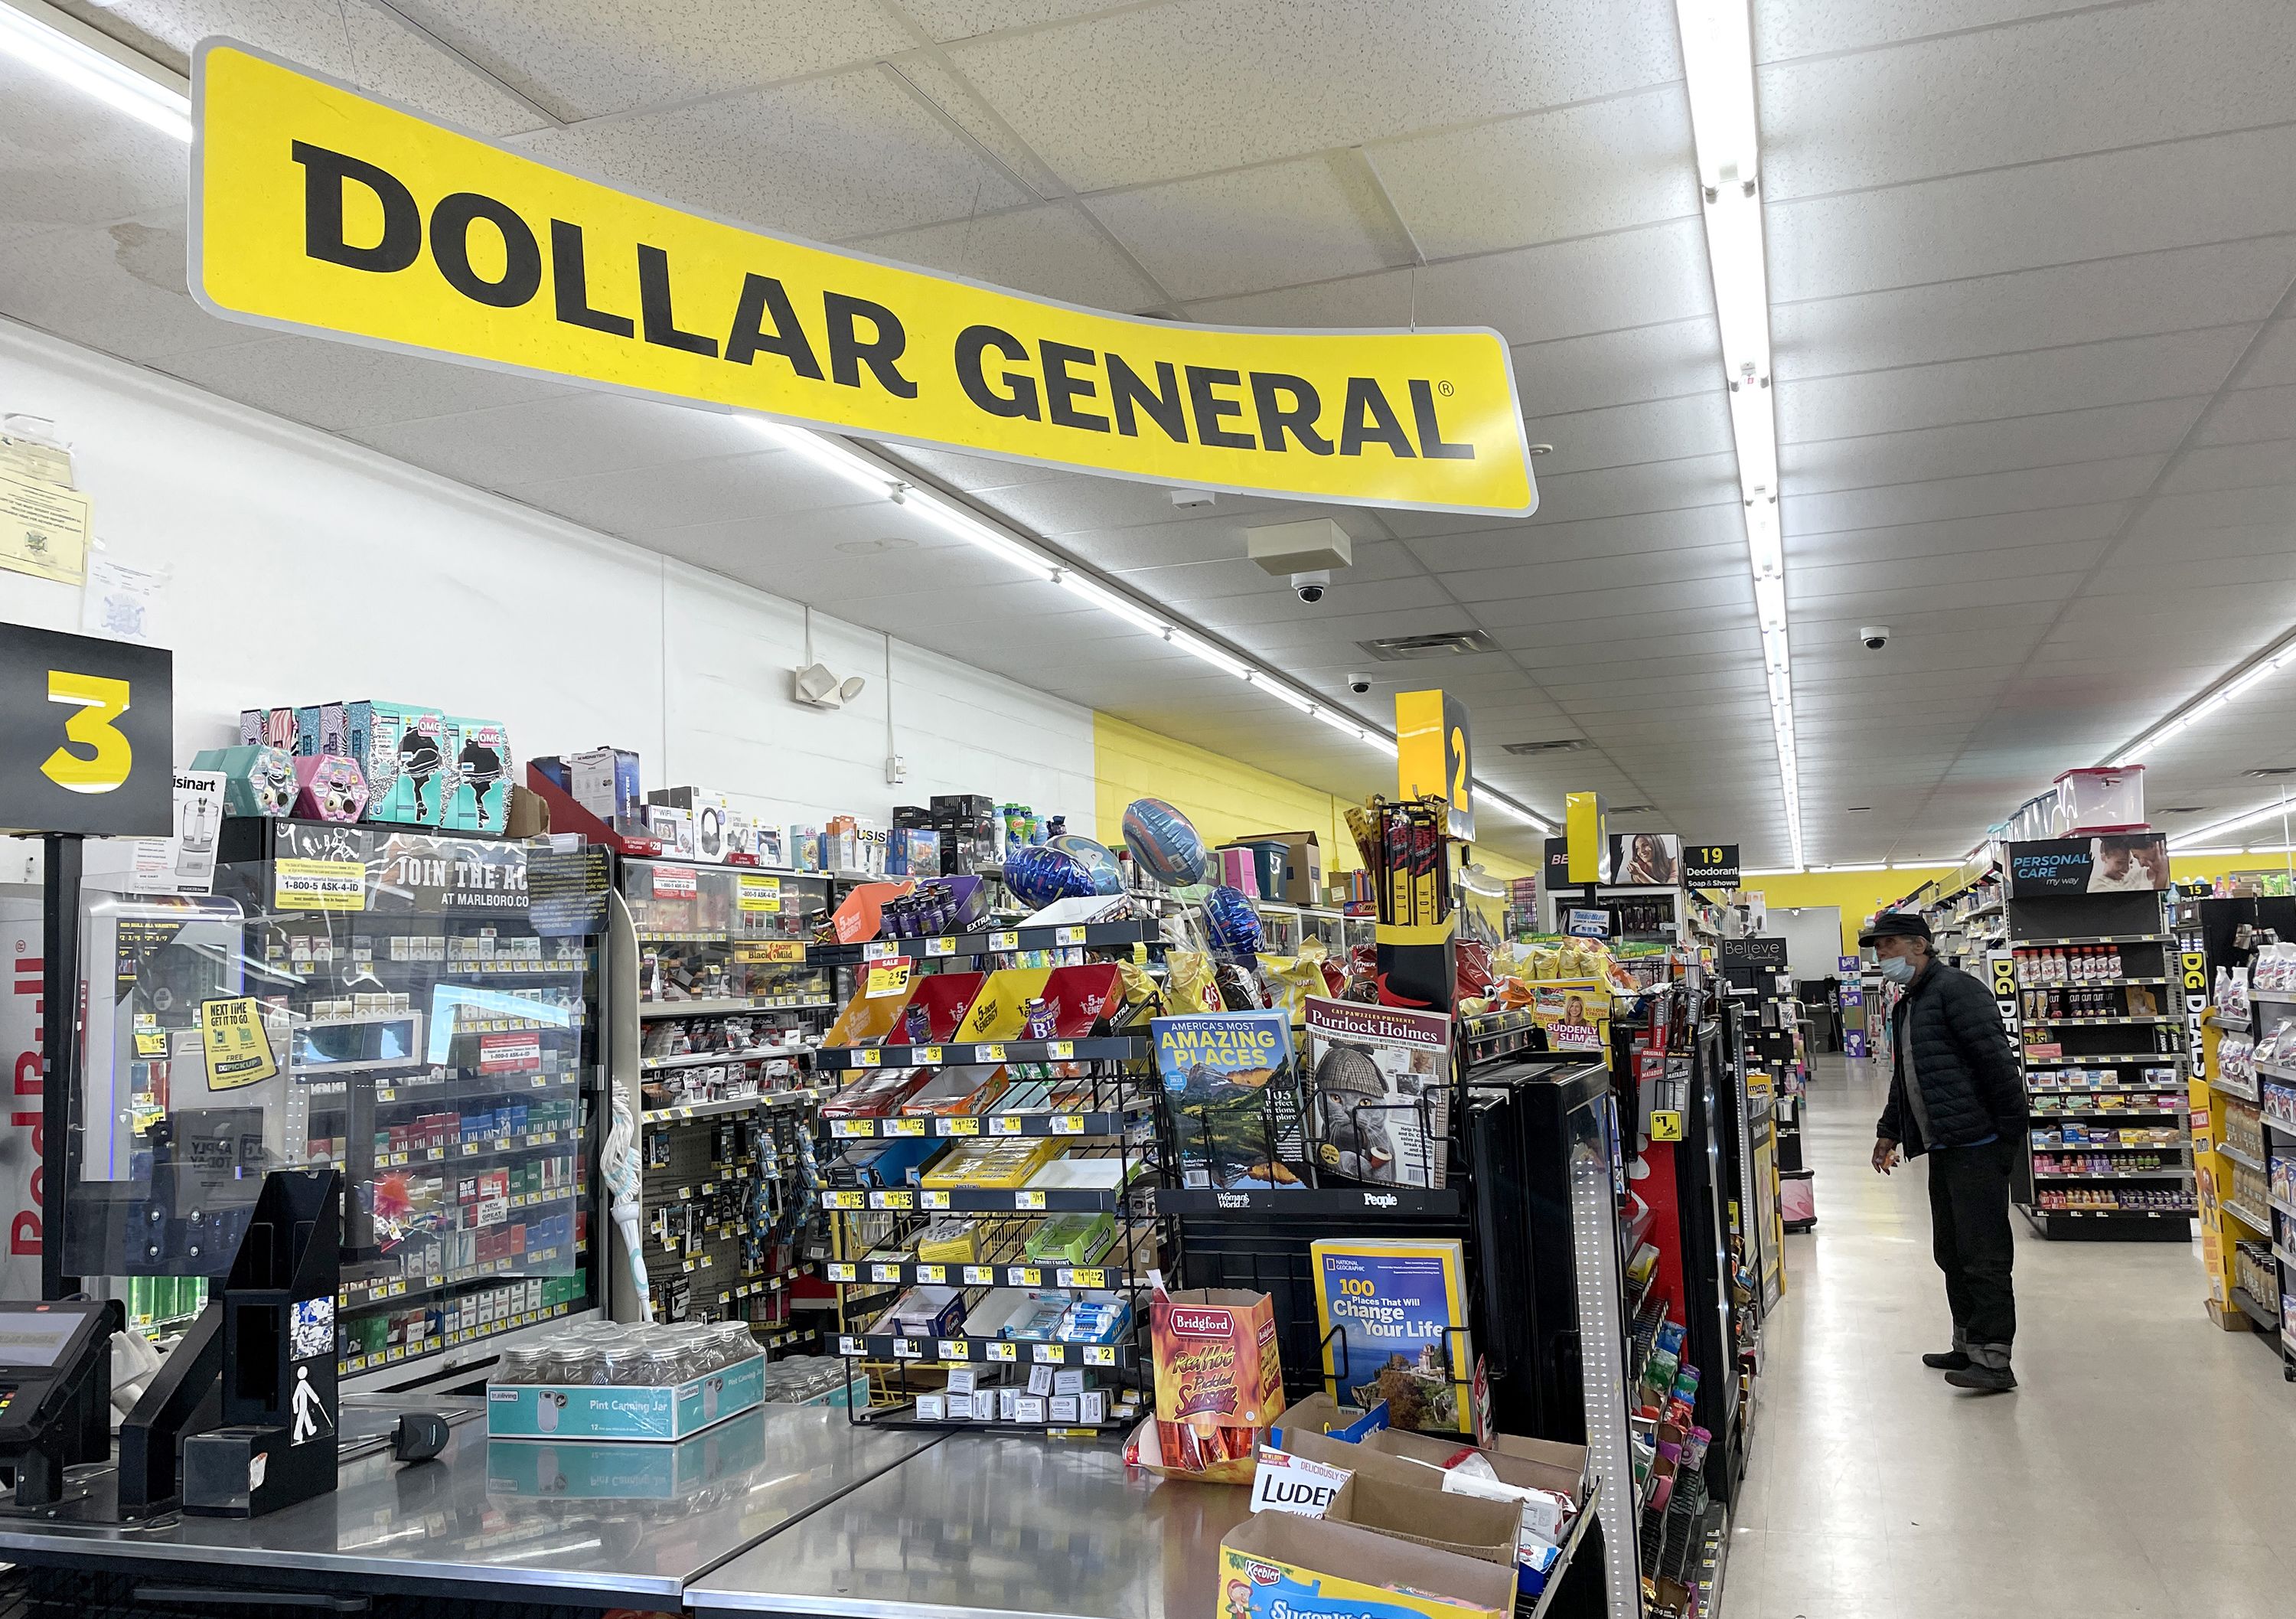 Dollar General's newest shoppers: People making $100,000 a year | CNN Business